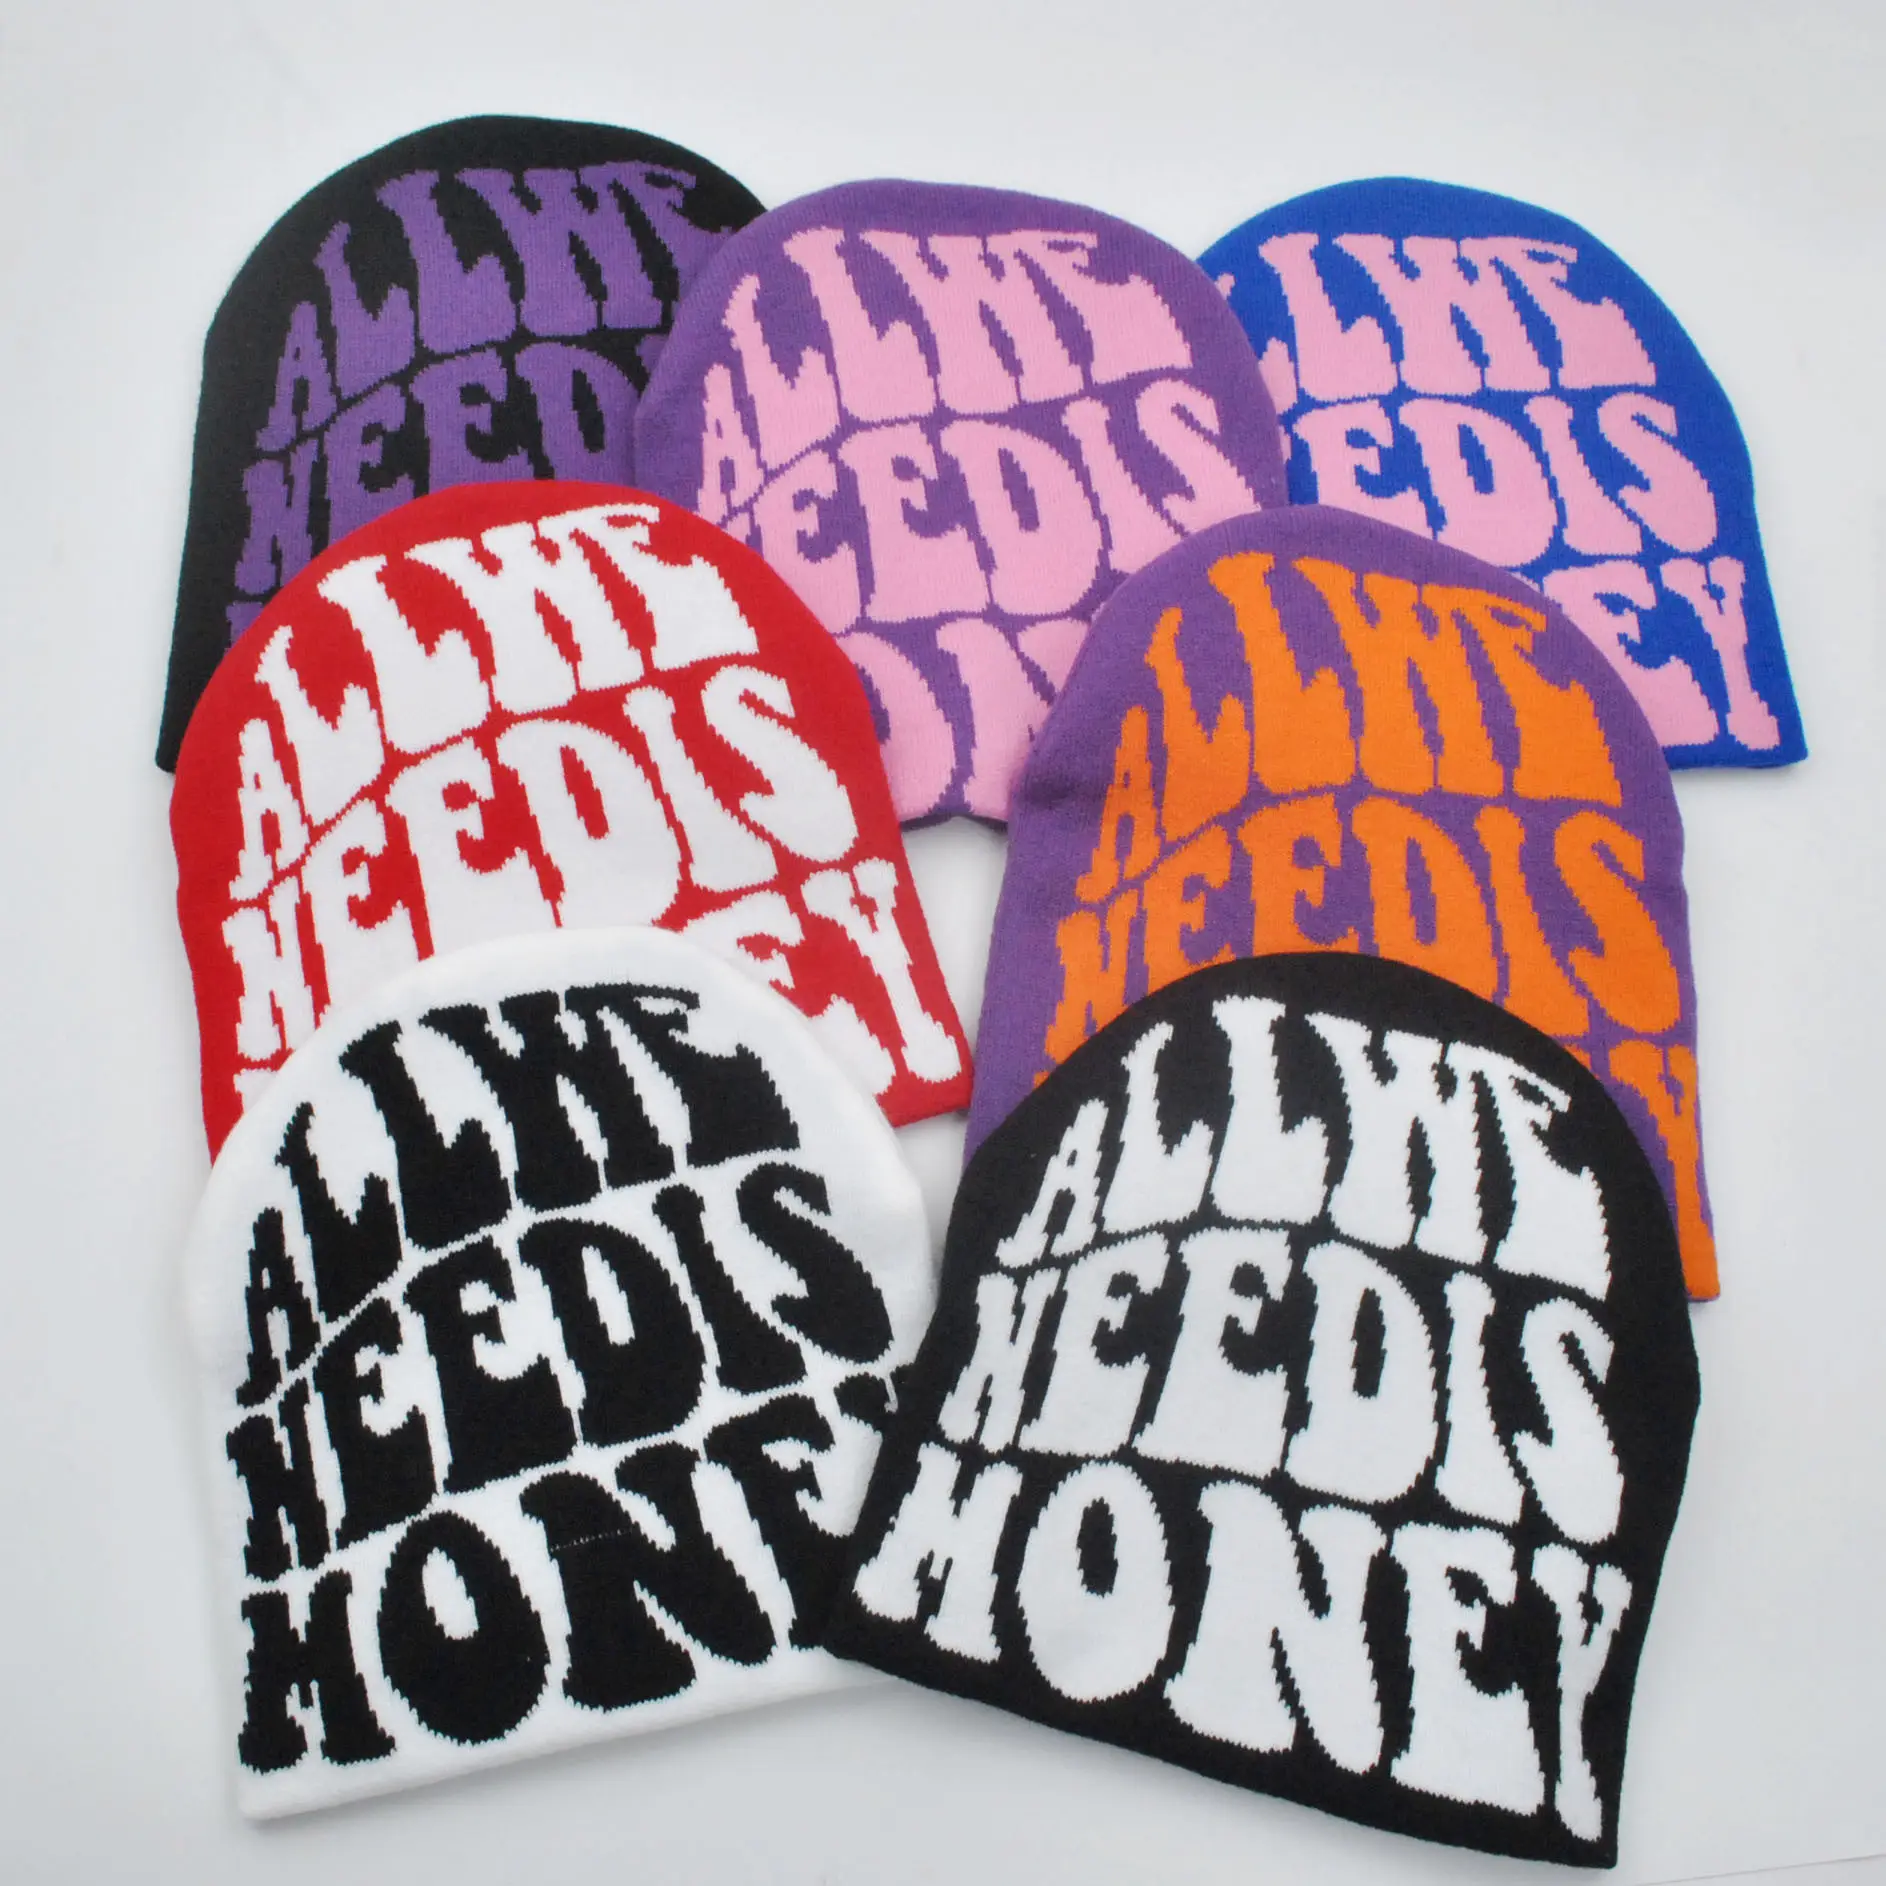 ALLWE NEEDIS MONEY beanie hat fashion letter Jacquard knitted hat hip hop beanie Knitted Hat